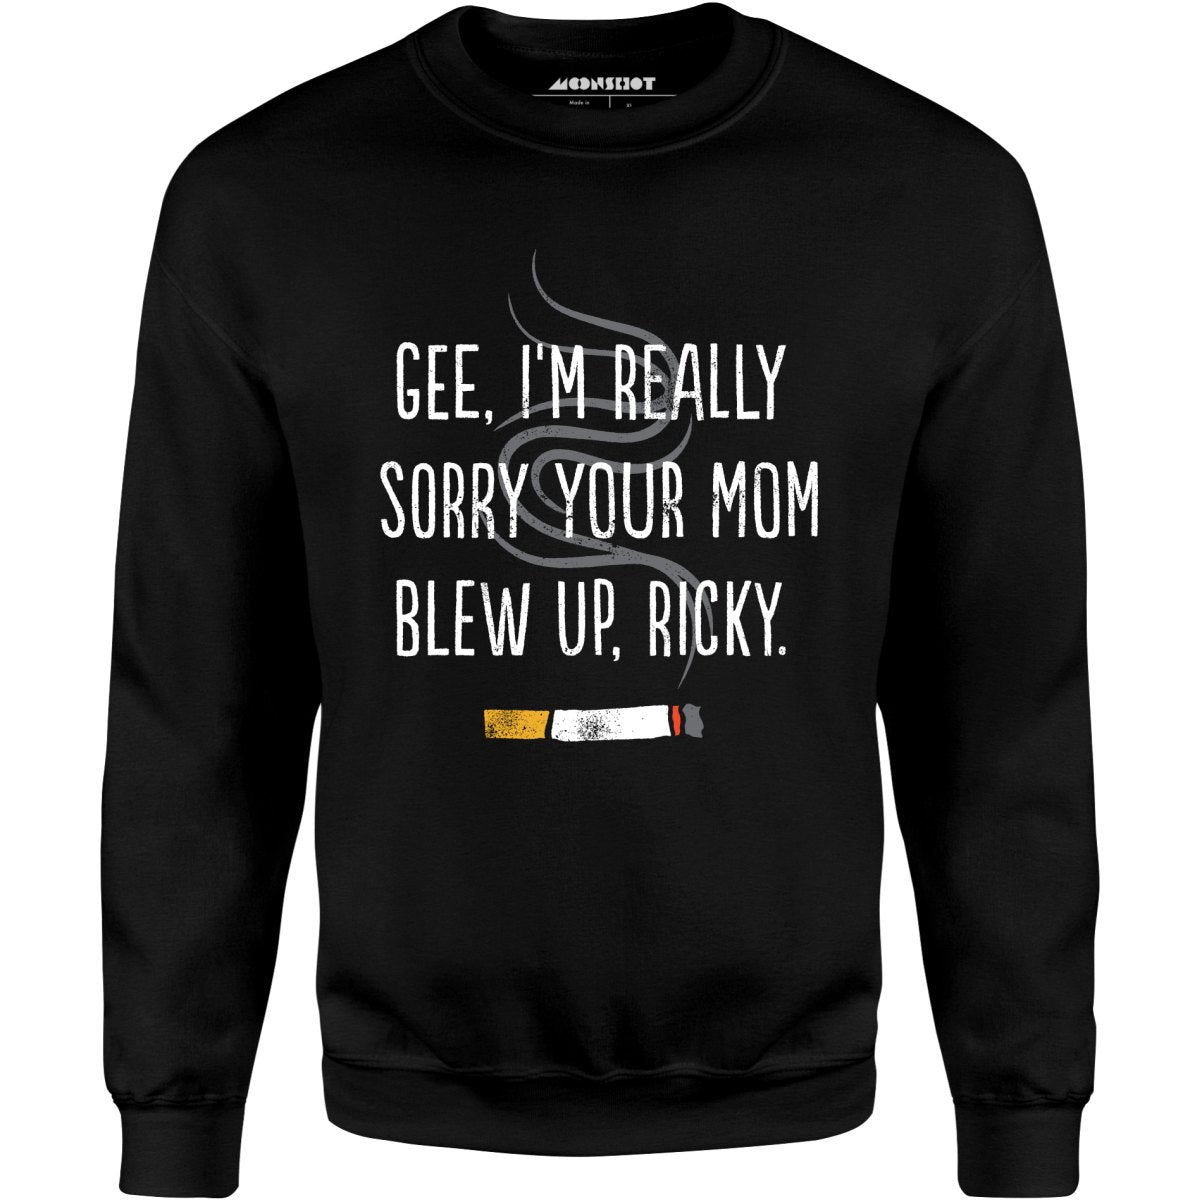 Gee, I'm Really Sorry Your Mom Blew Up, Ricky - Unisex Sweatshirt